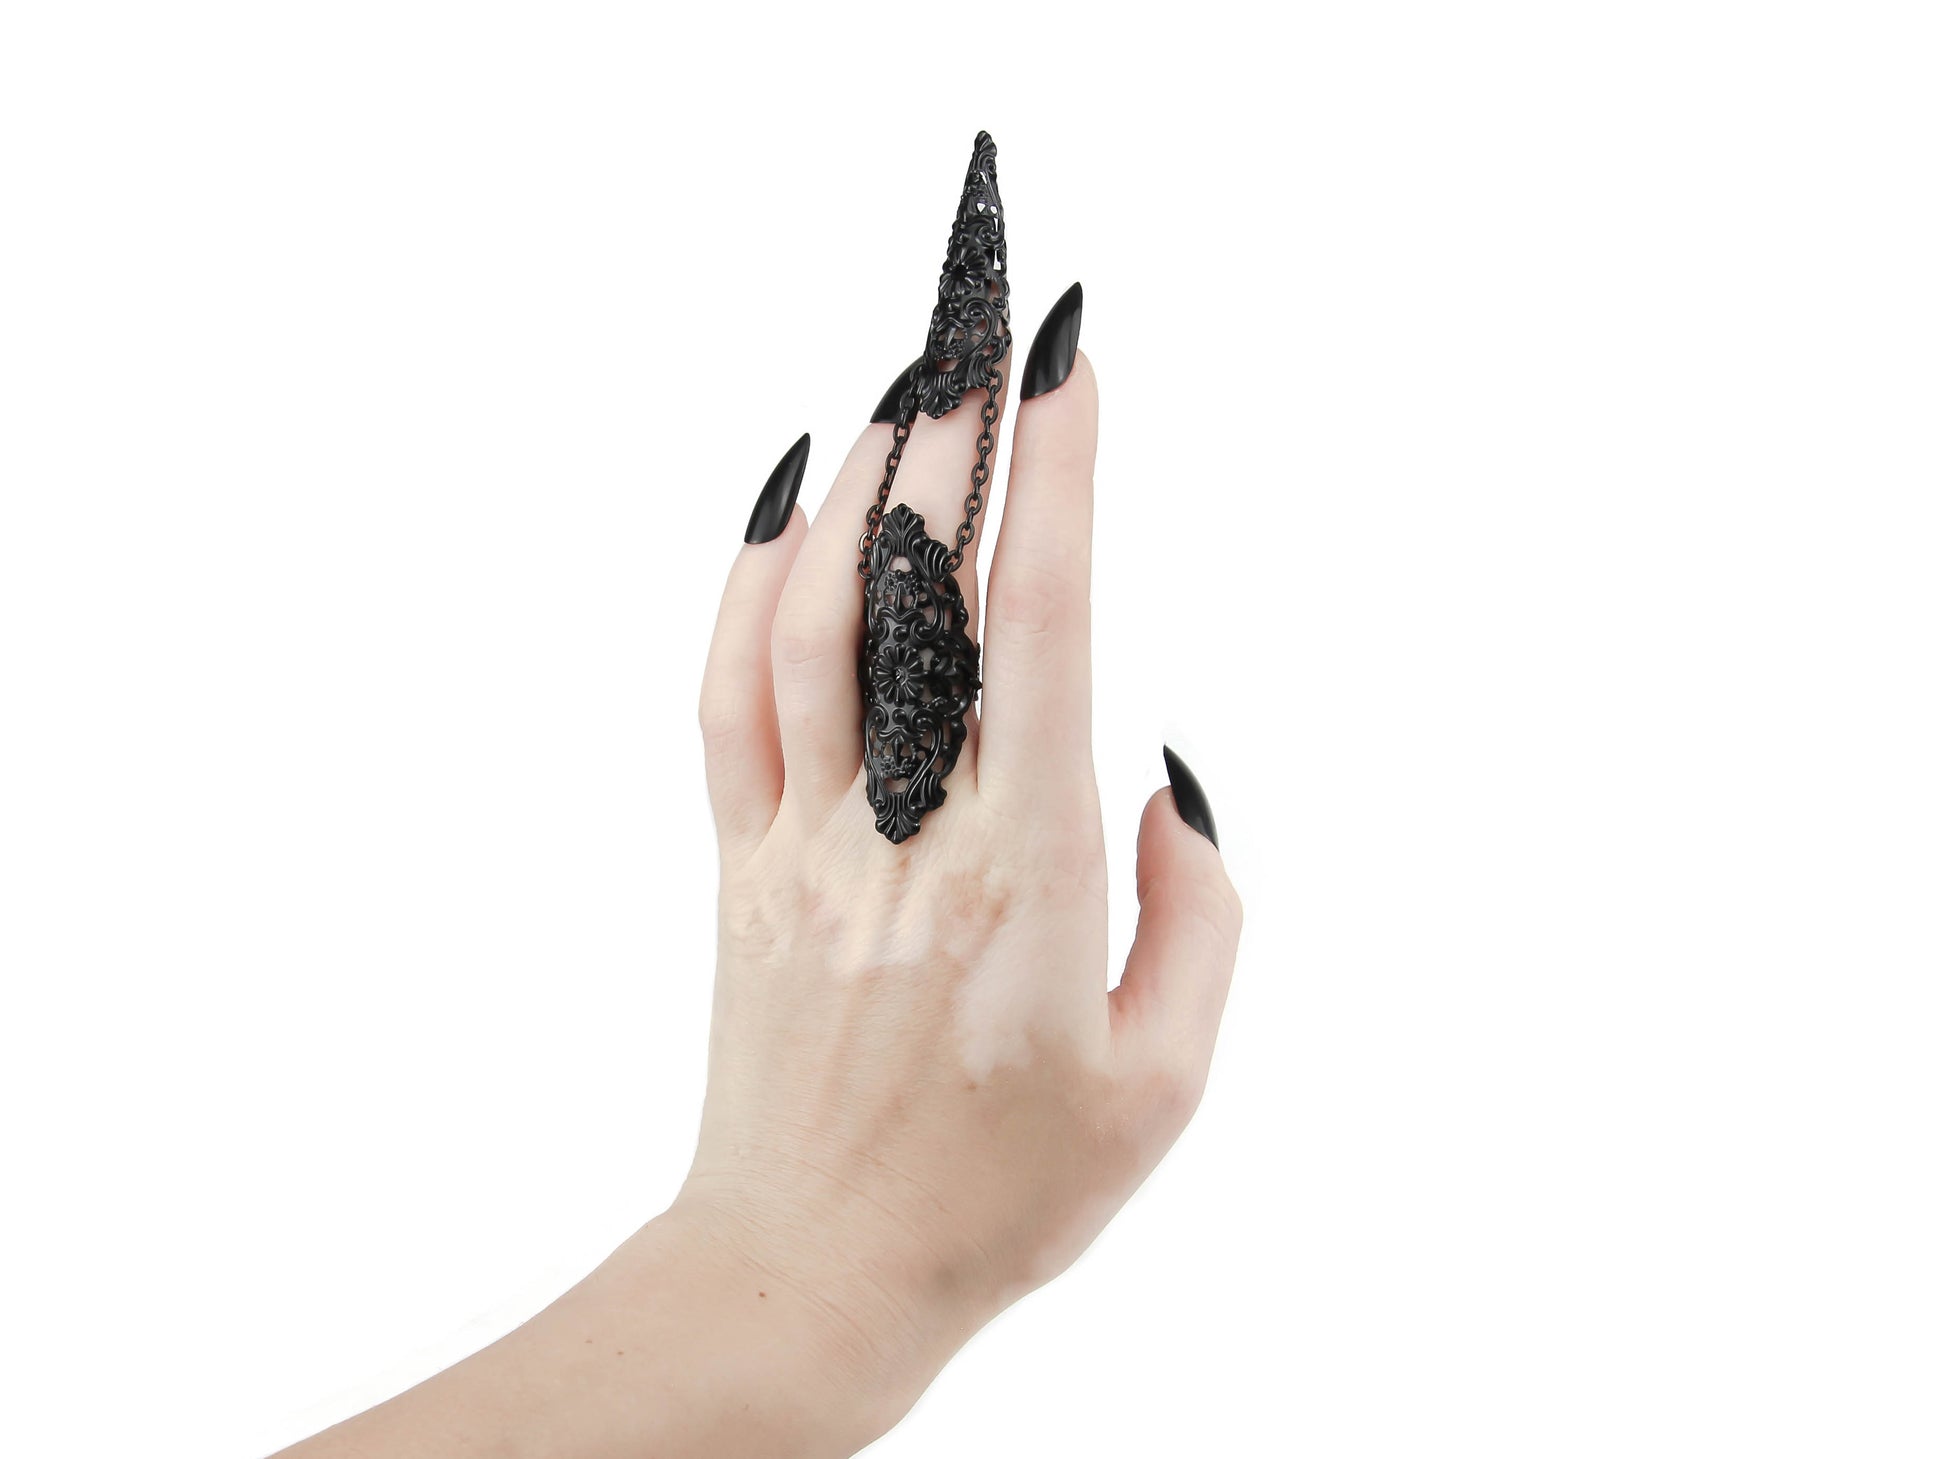 This image captures a striking black claw ring from Myril Jewels, elegantly worn on the middle finger. The ring's intricate, dark design epitomizes the brand's neo-goth aesthetic, perfect for Halloween, punk styles, and witchcore enthusiasts. It's an ideal piece for gothic-chic expressions, rave parties, or as a bold jewelry choice for everyday wear, making it a unique goth girlfriend gift or a daring accessory for anyone who loves standout, handcrafted jewelry.